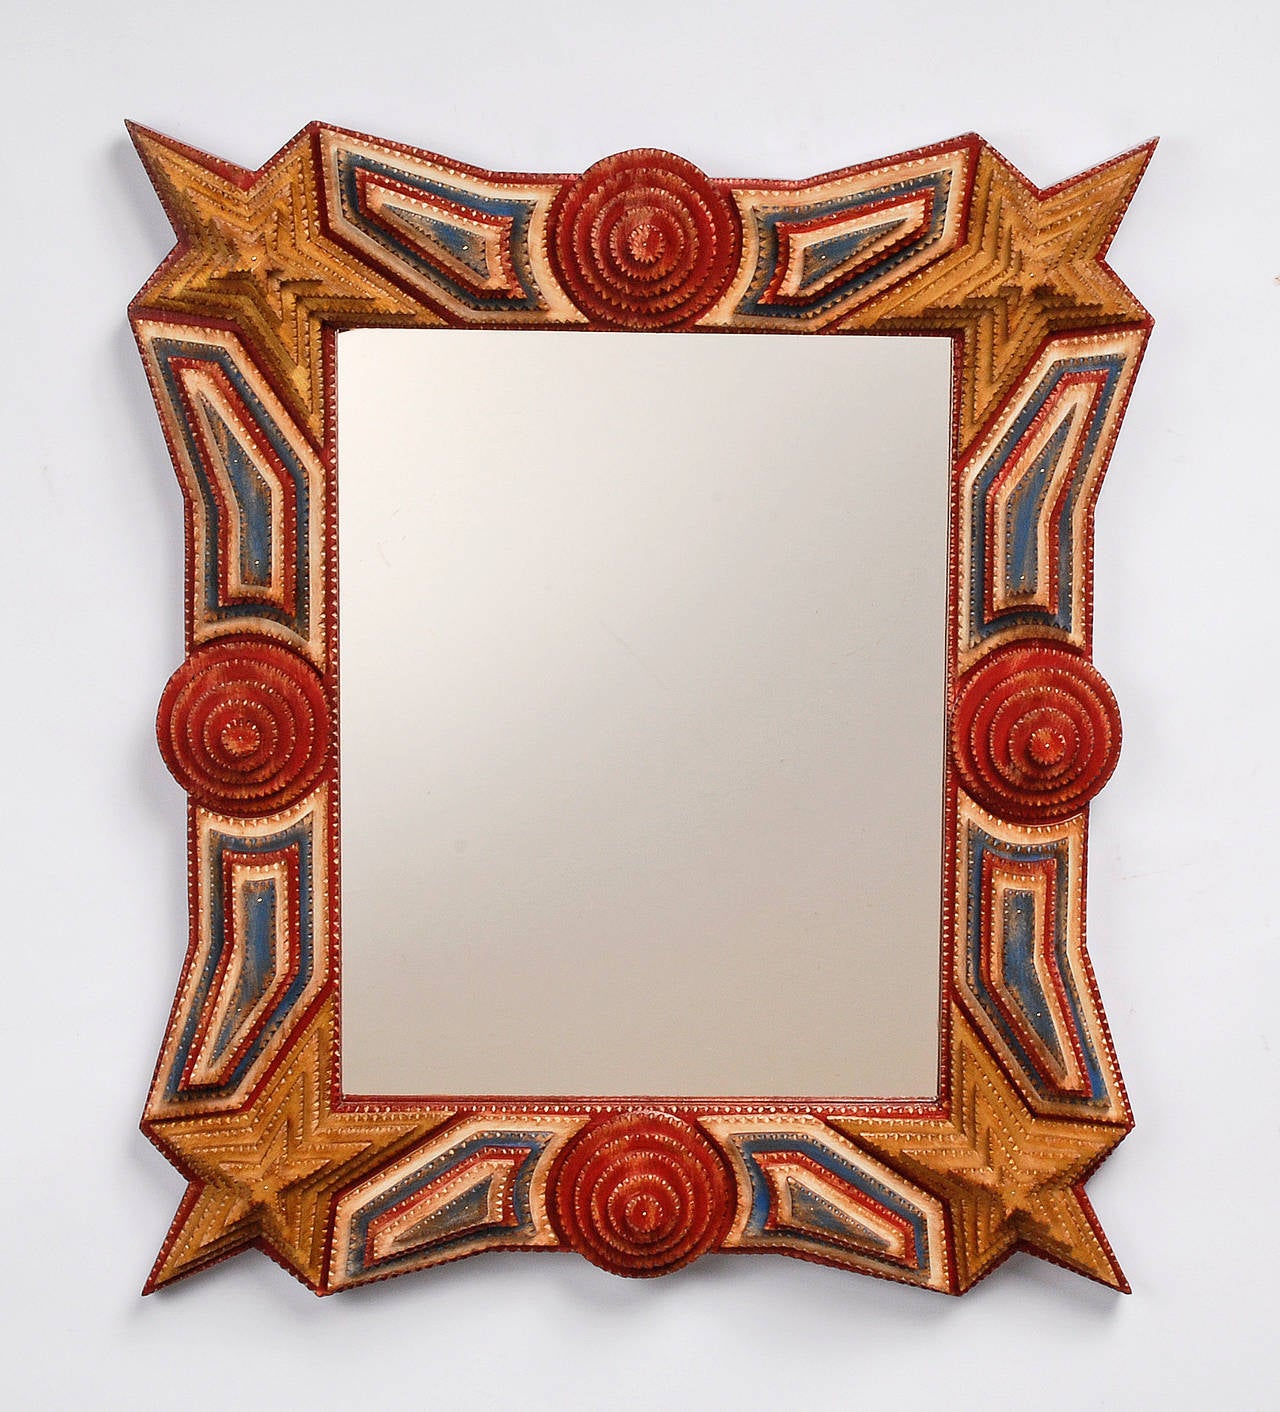 An inspired patriotic stars and stripes Tramp Art mirror by contemporary artist Angie Dow.